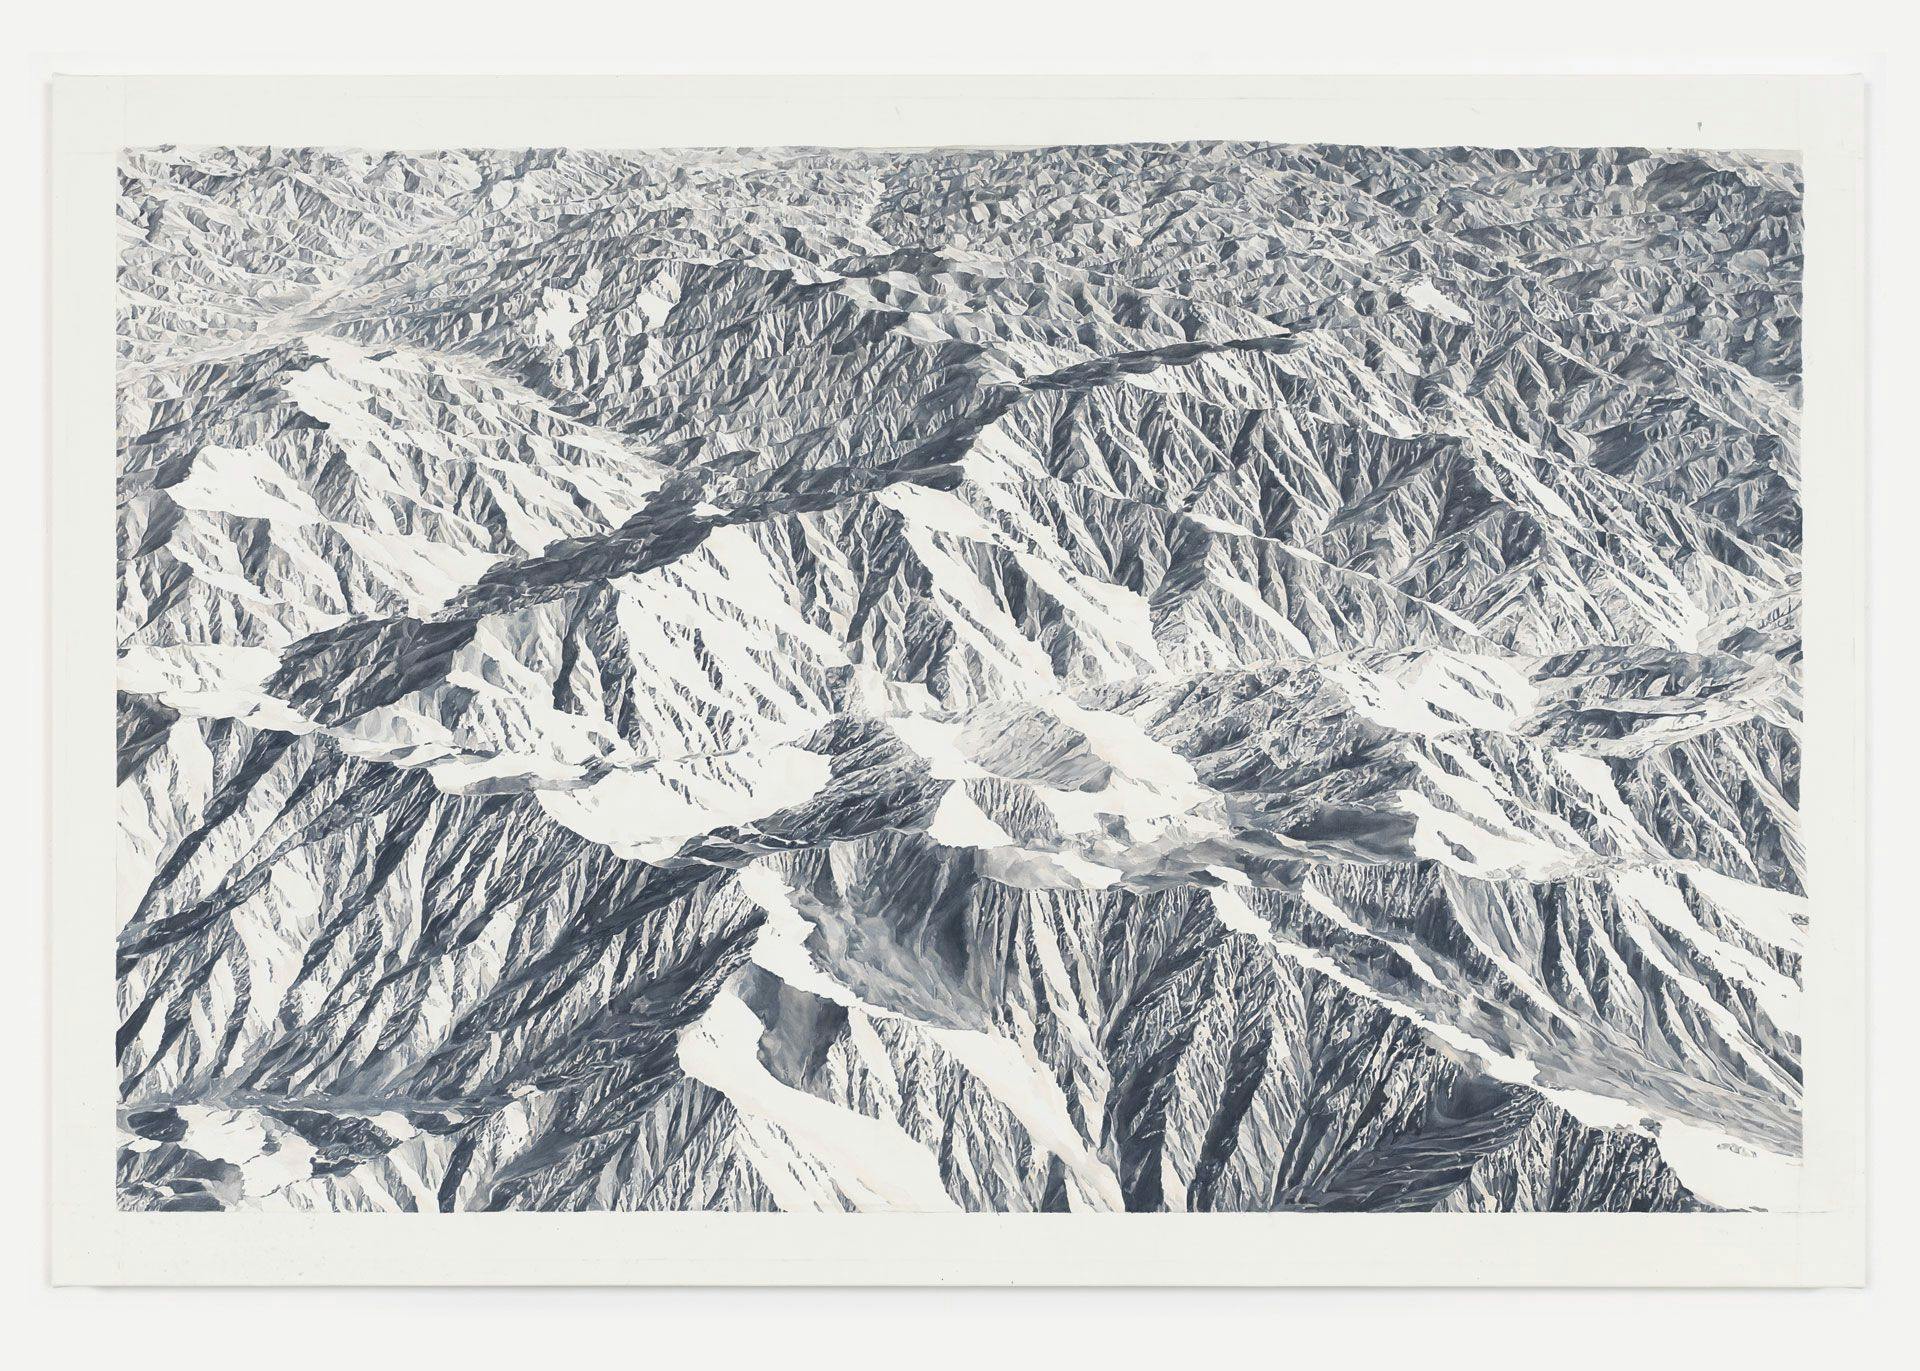 A painting on linen by Toba Khedoori, titled Untitled (mountains 2), dated 2011 to 2012.